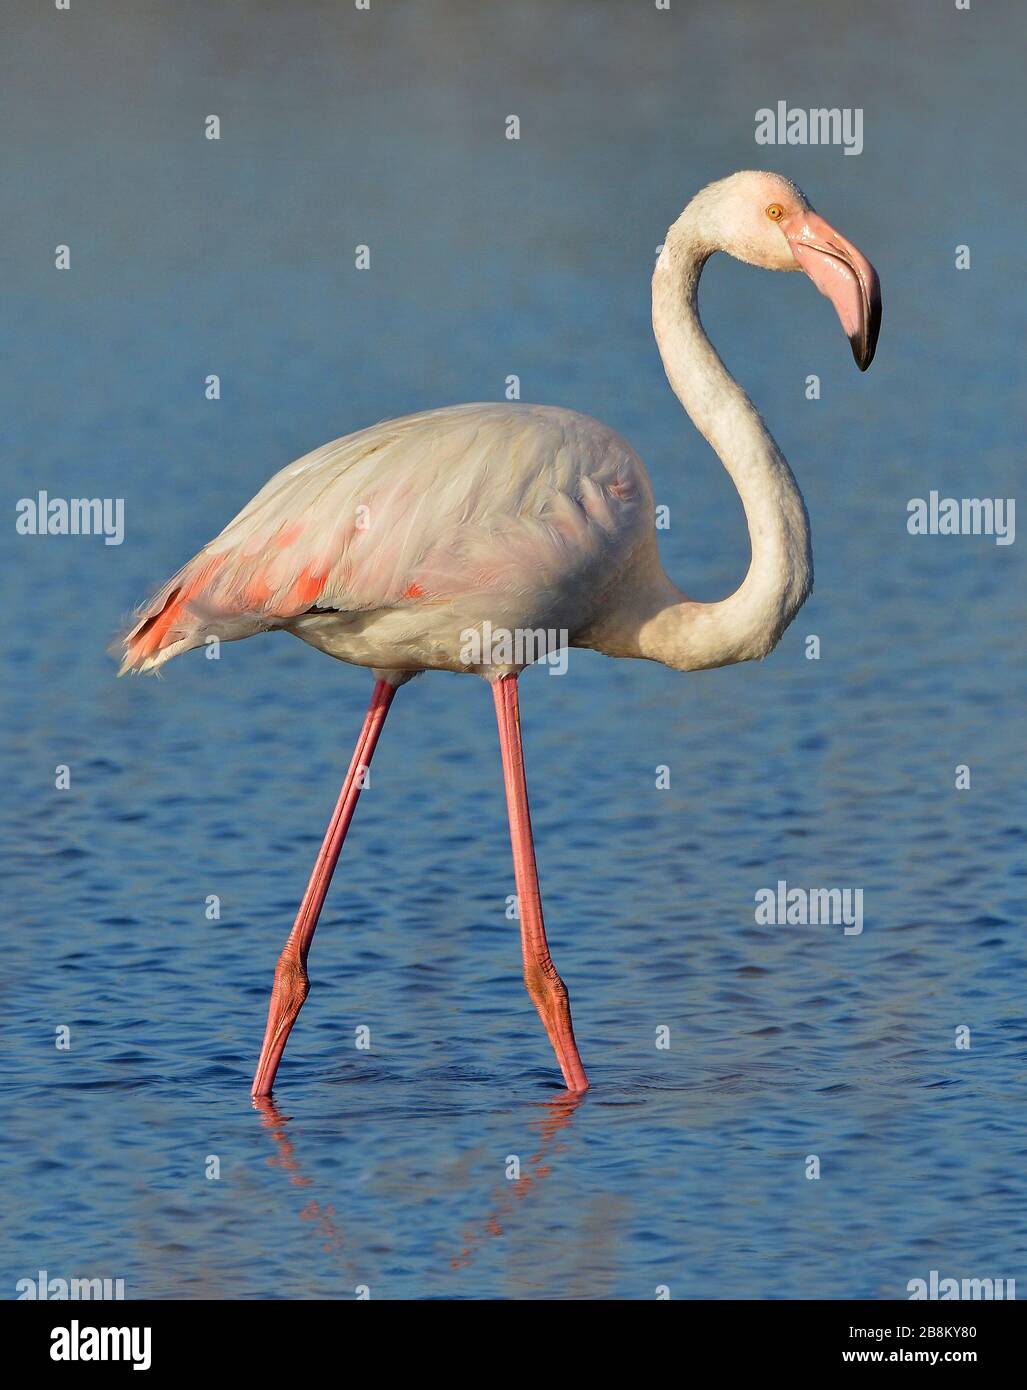 pink flamingo in the pond Stock Photo